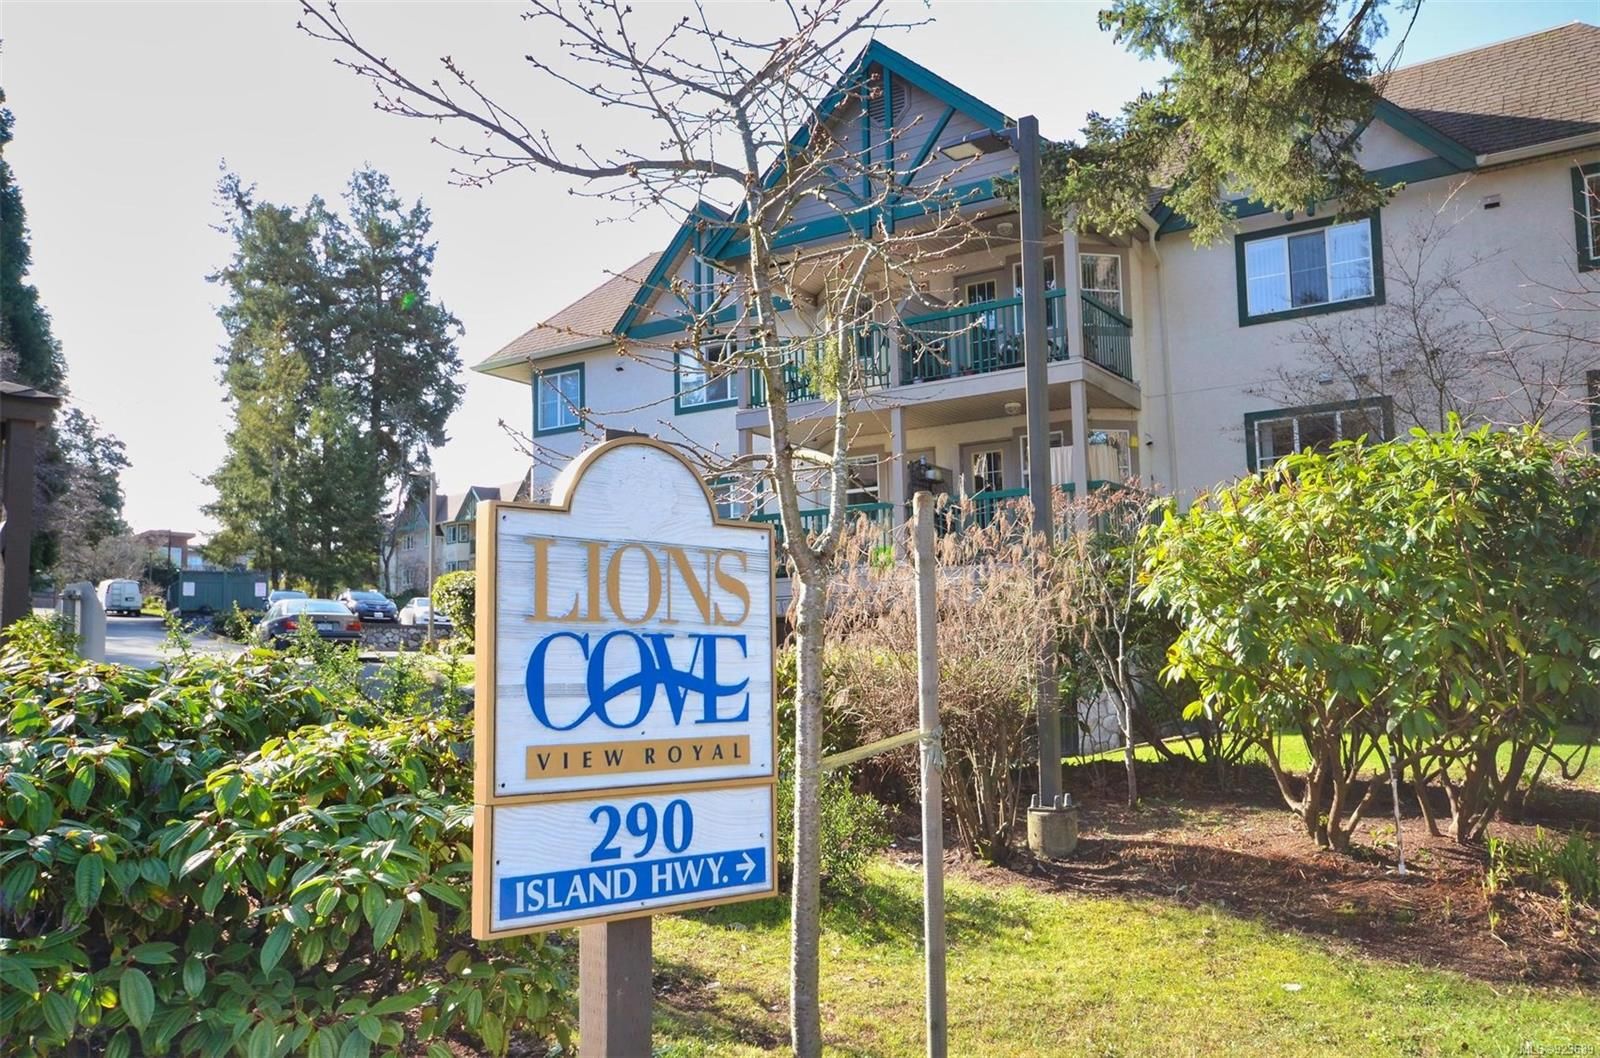 Welcome To 290 Island Hwy, Lions Cove